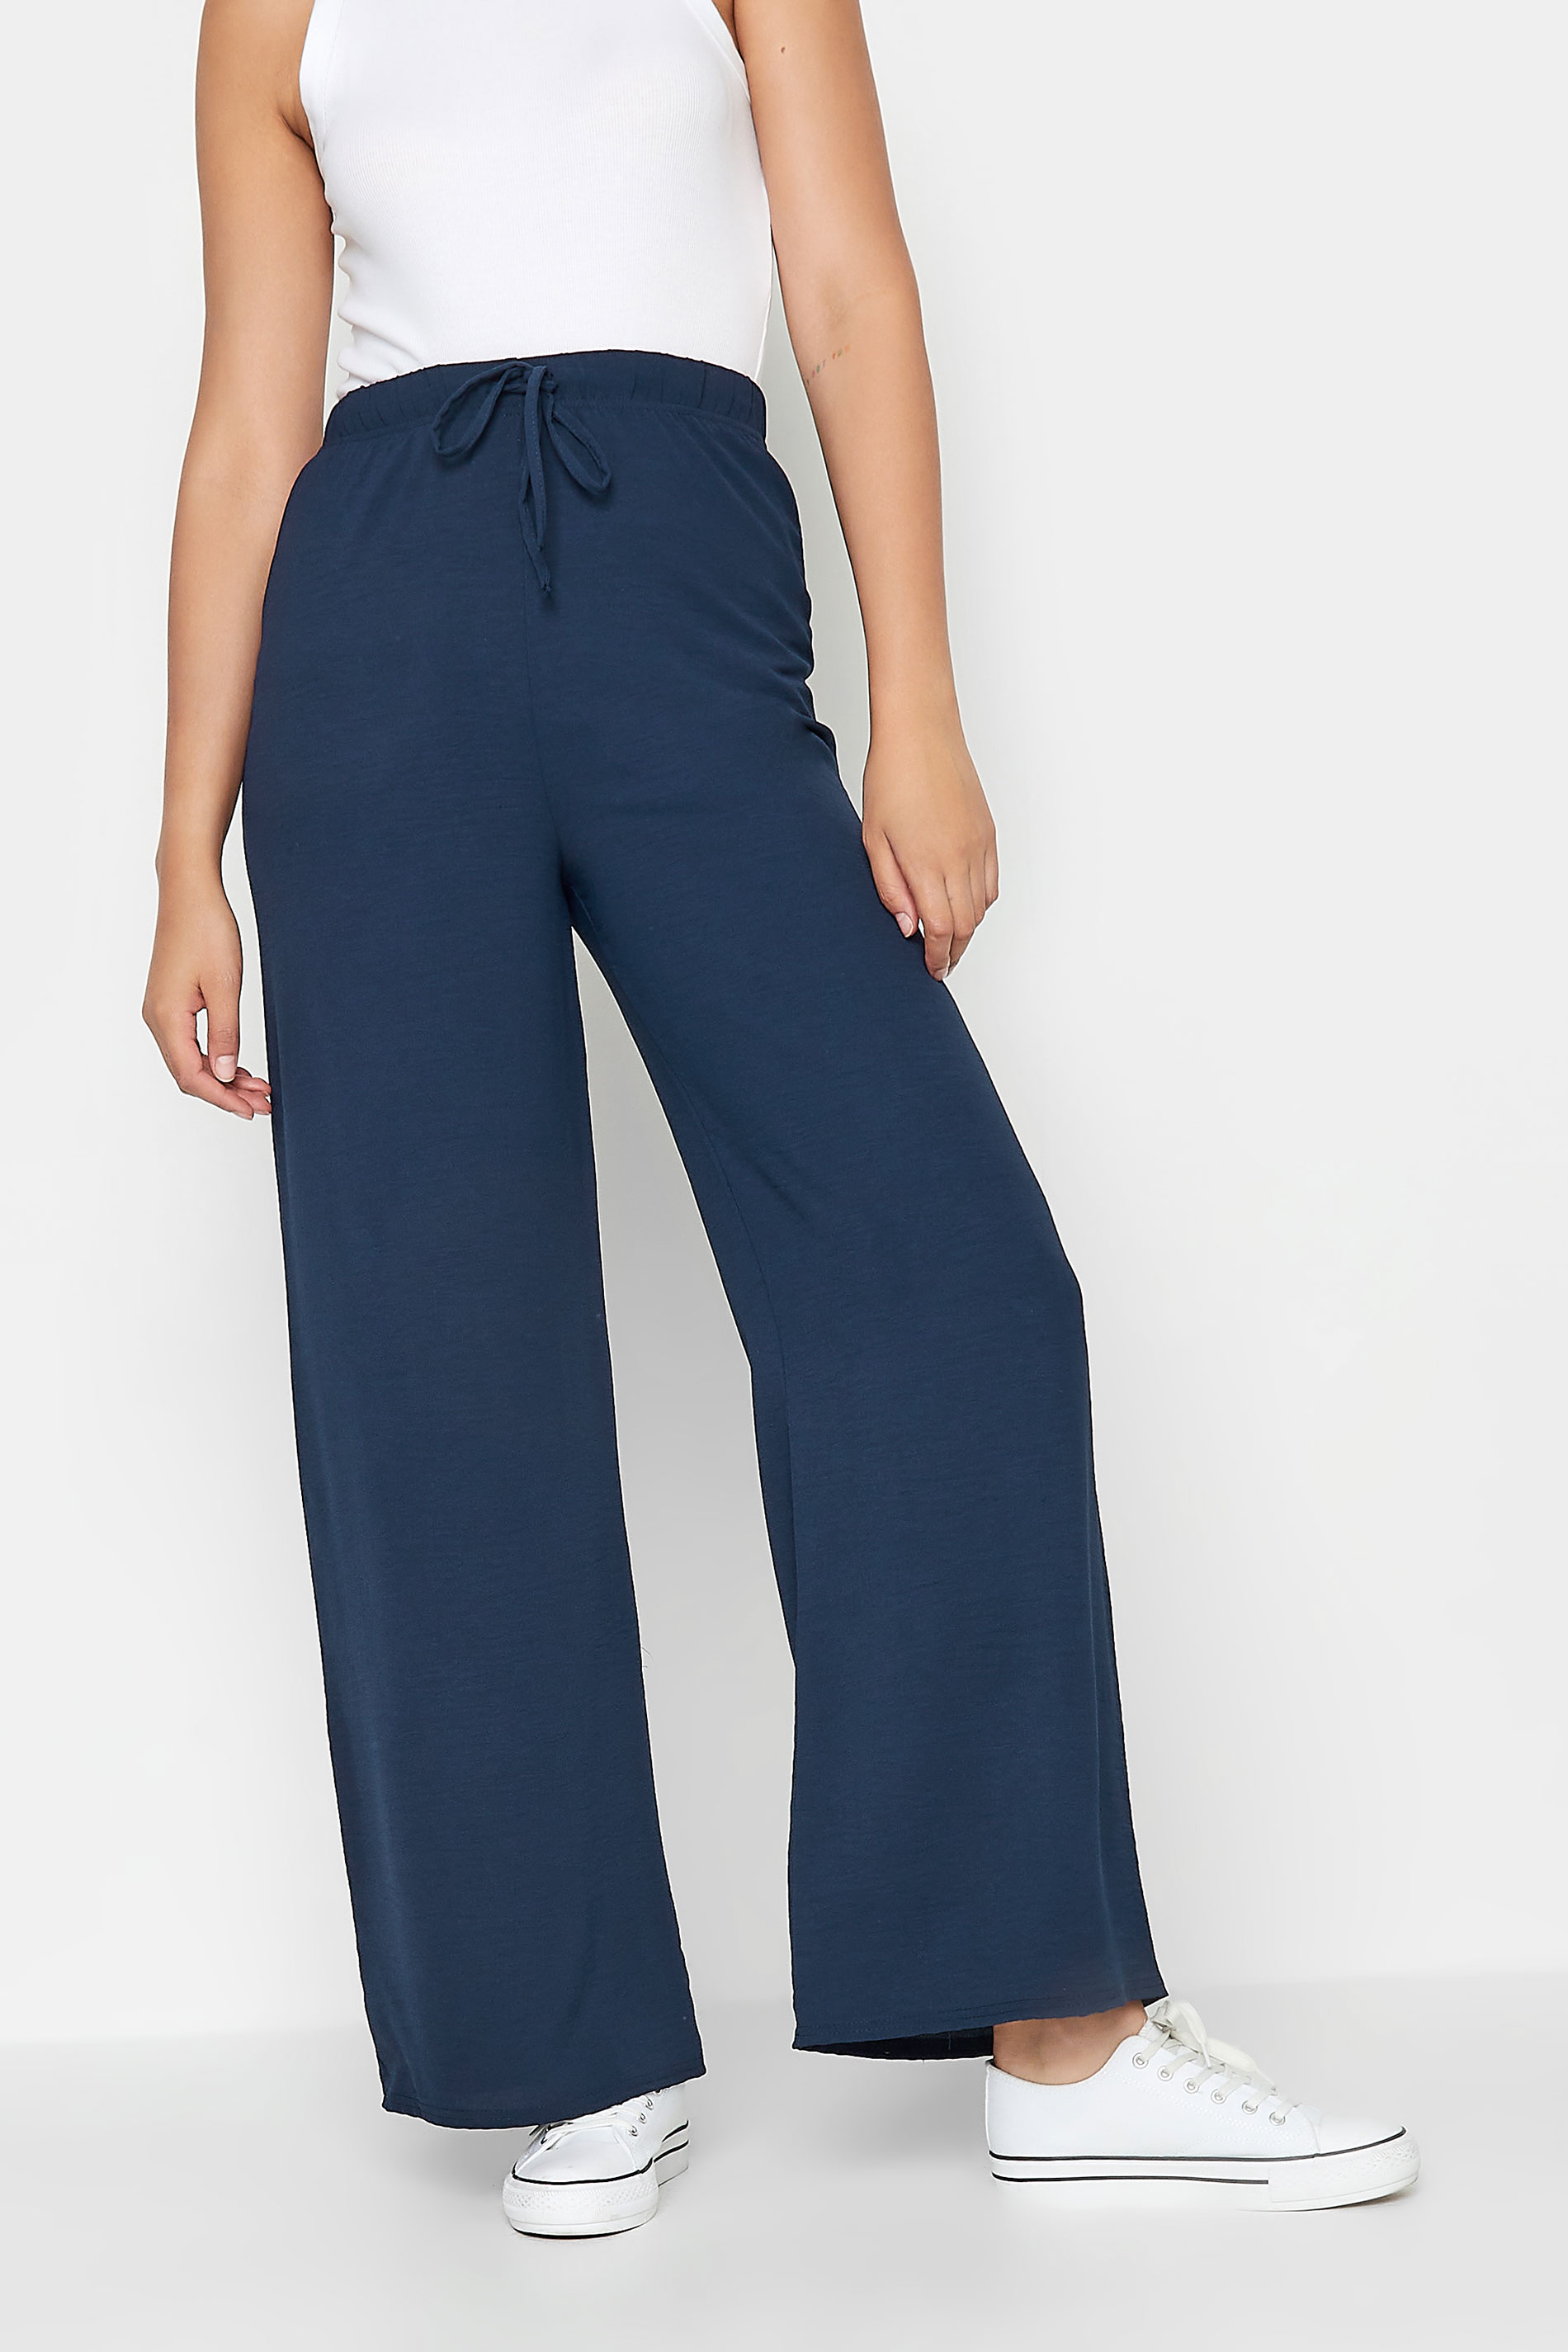 LTS Tall Navy Blue Crepe Wide Leg Trousers | Long Tall Sally 1